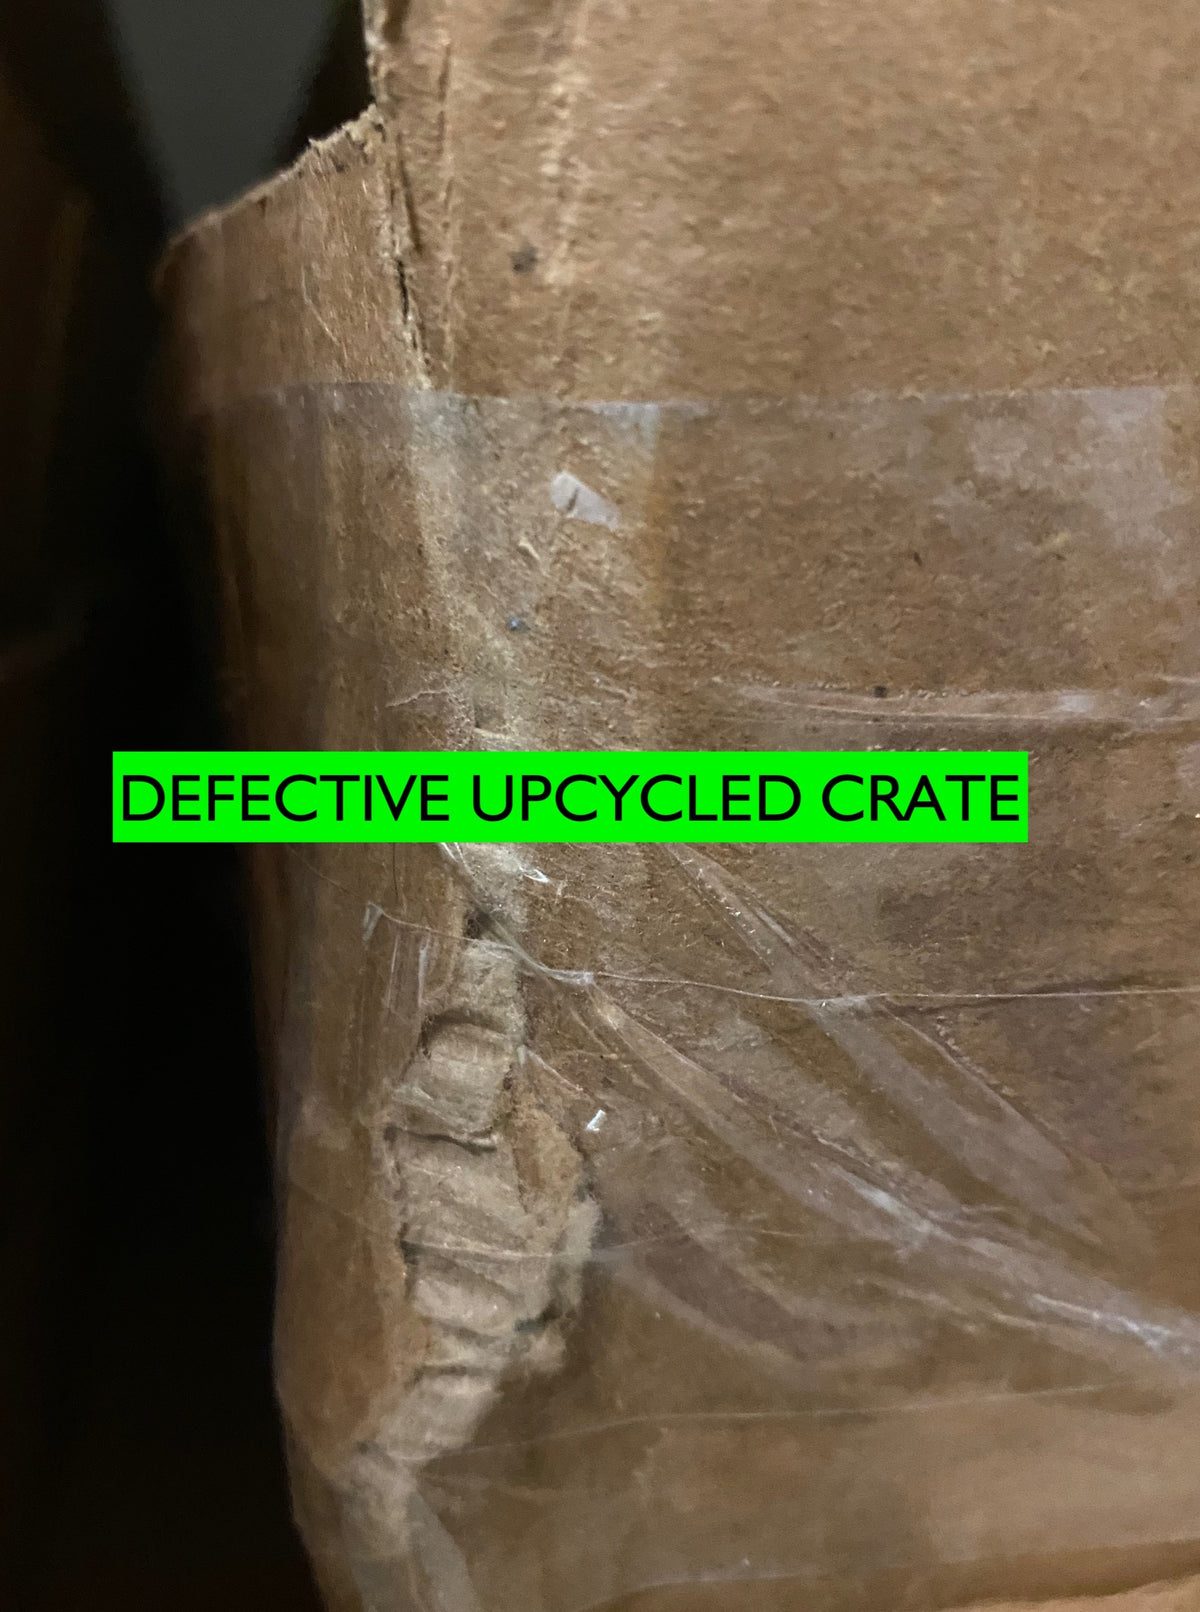 We carry upcycled/used E and D crates for resale. Most of our used crates are in good shape. The crates we sell as defective have most of the damage on the lids and in particular the corners of the lids. They are usable, they just may need some thoughtful tape repair.